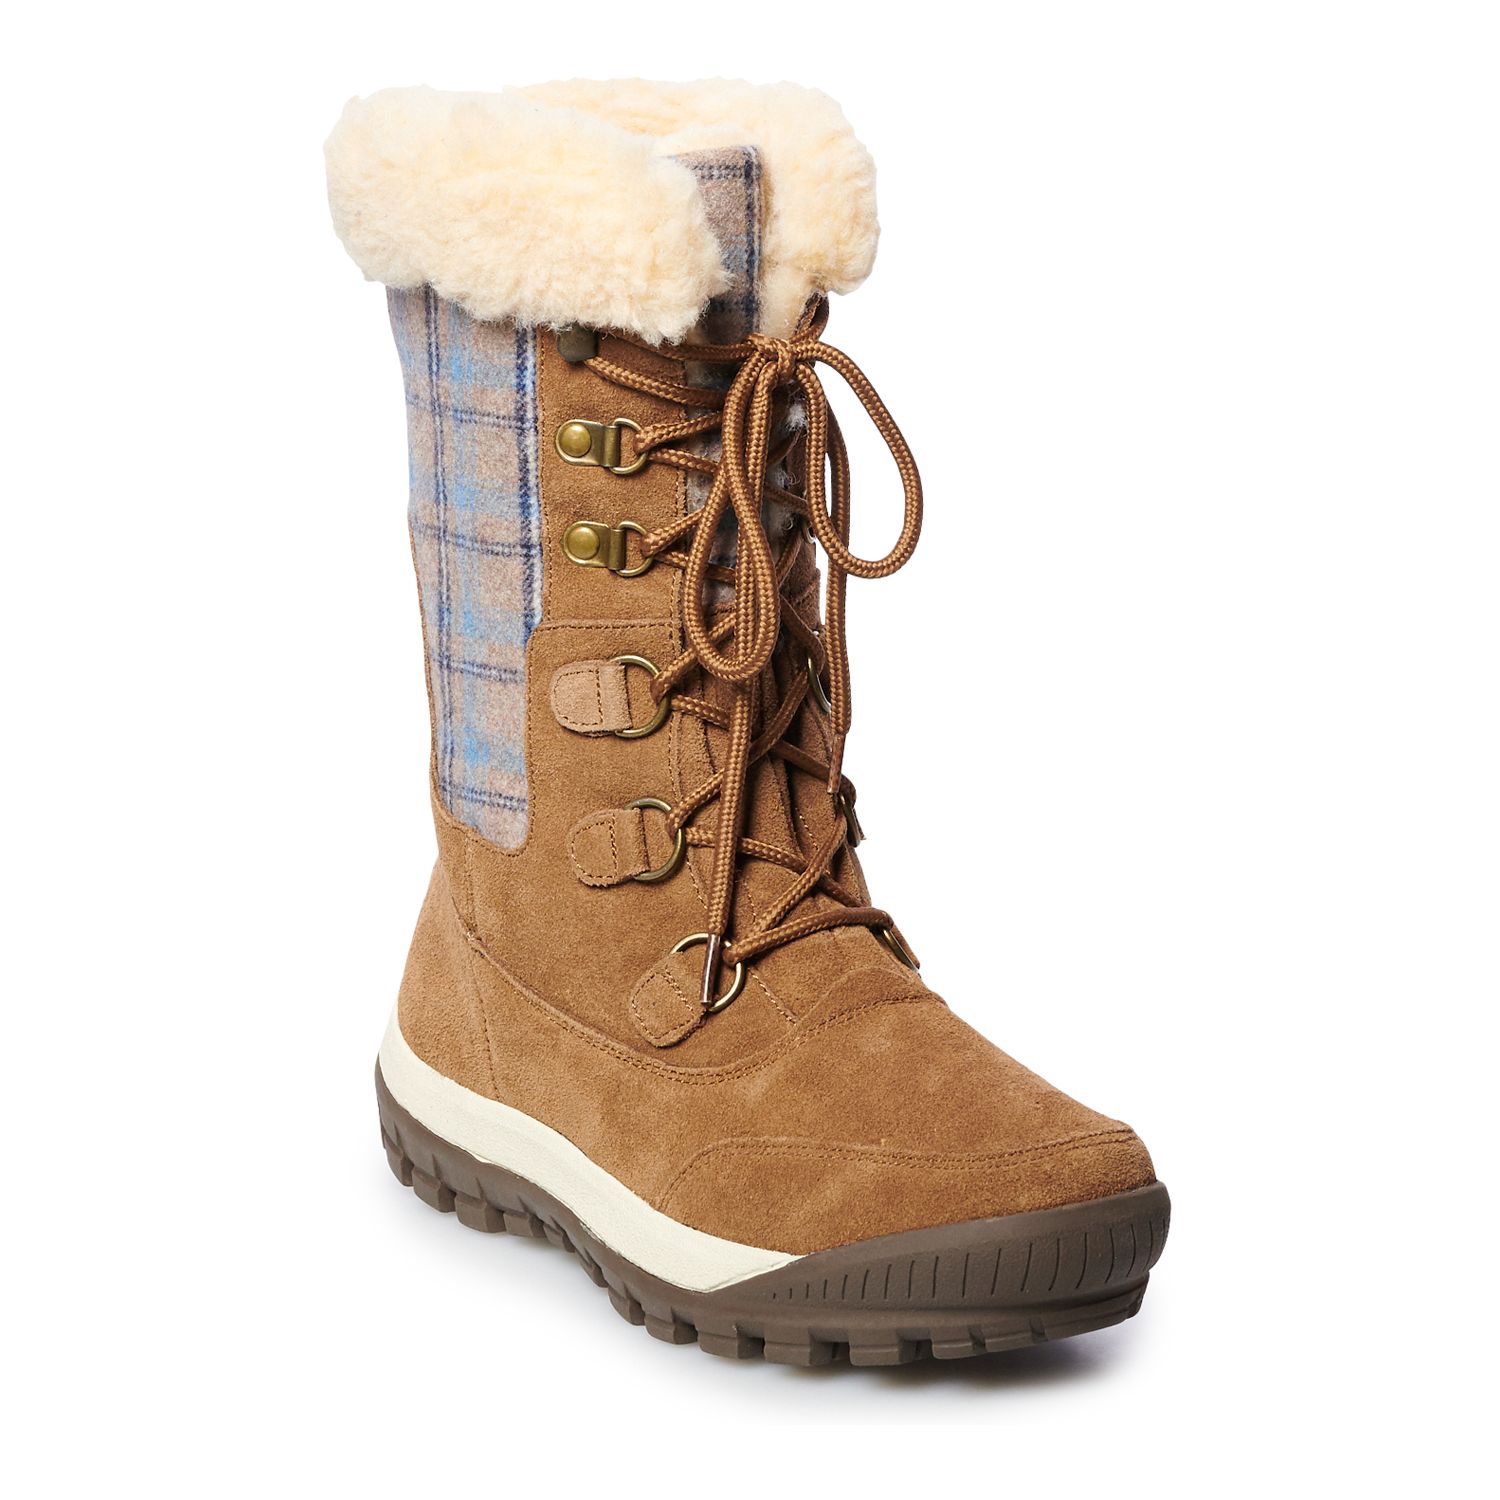 woman's winter boots